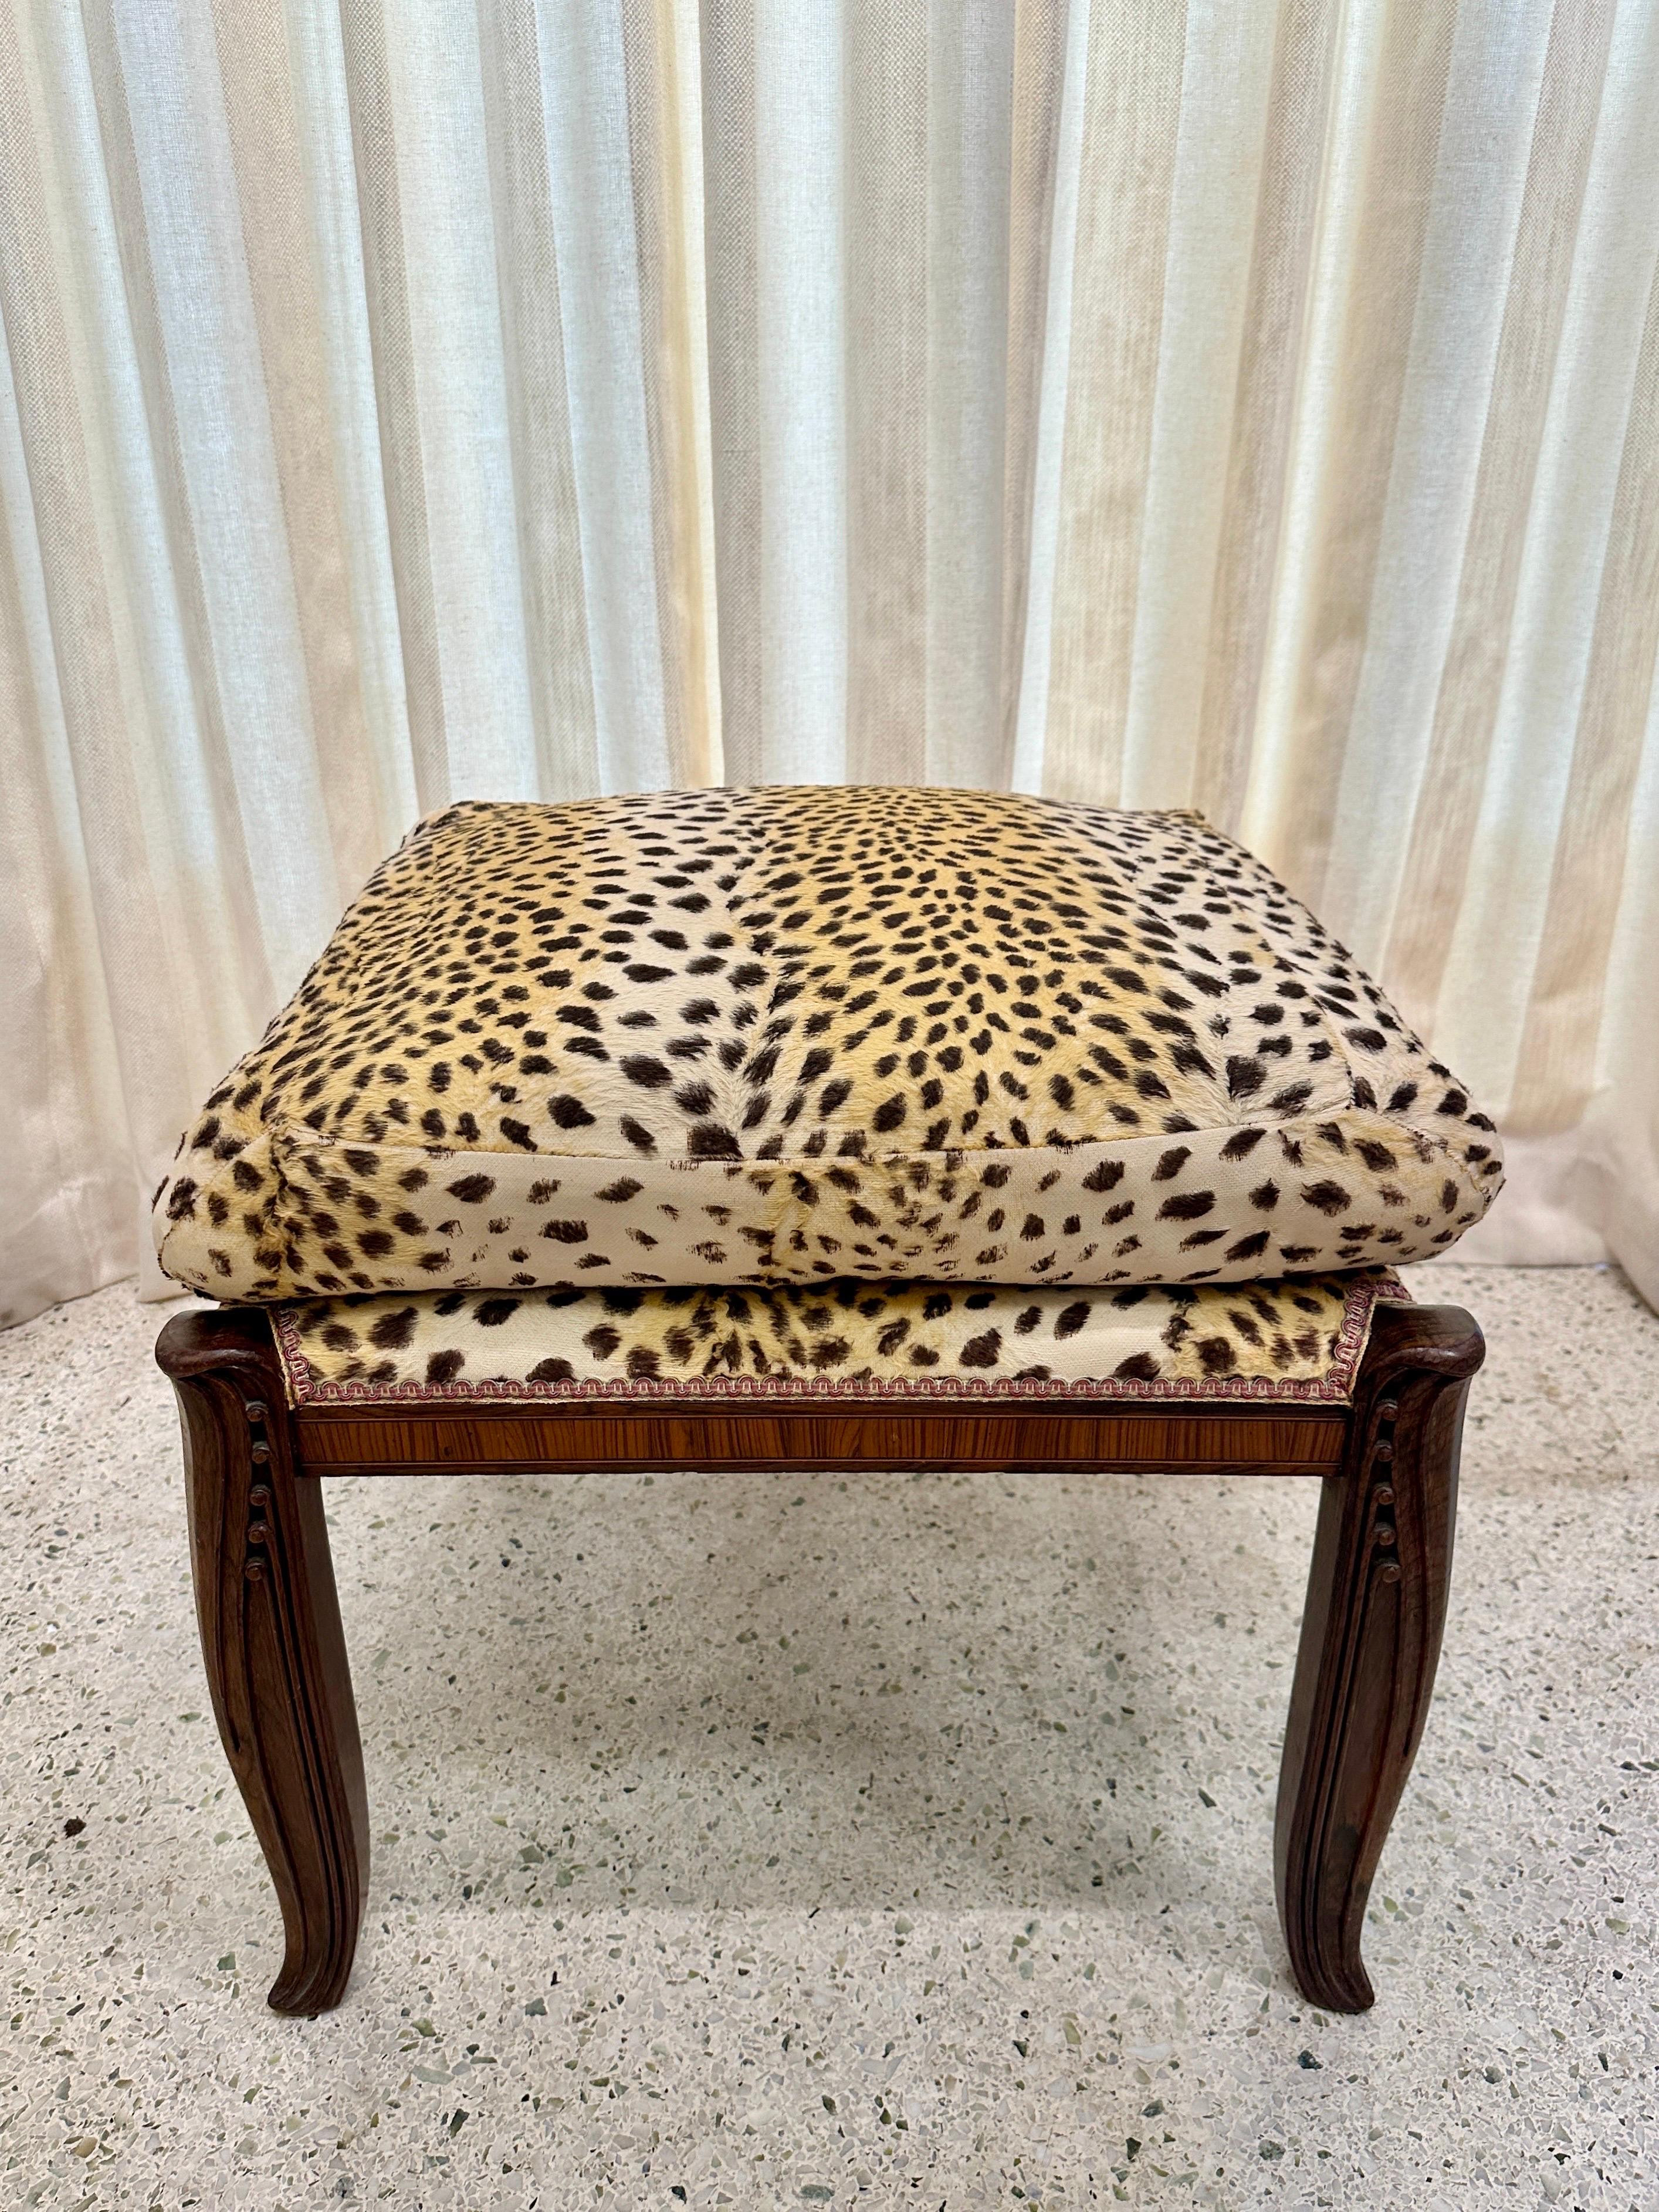 This is a wonderful Art Deco period stool/ bench with original cheetah print fabric and carved ebony wood legs, marquetry inlay trim throughout.  It is sturdy, perfect height and features beautiful art deco details (see all detail images and video).